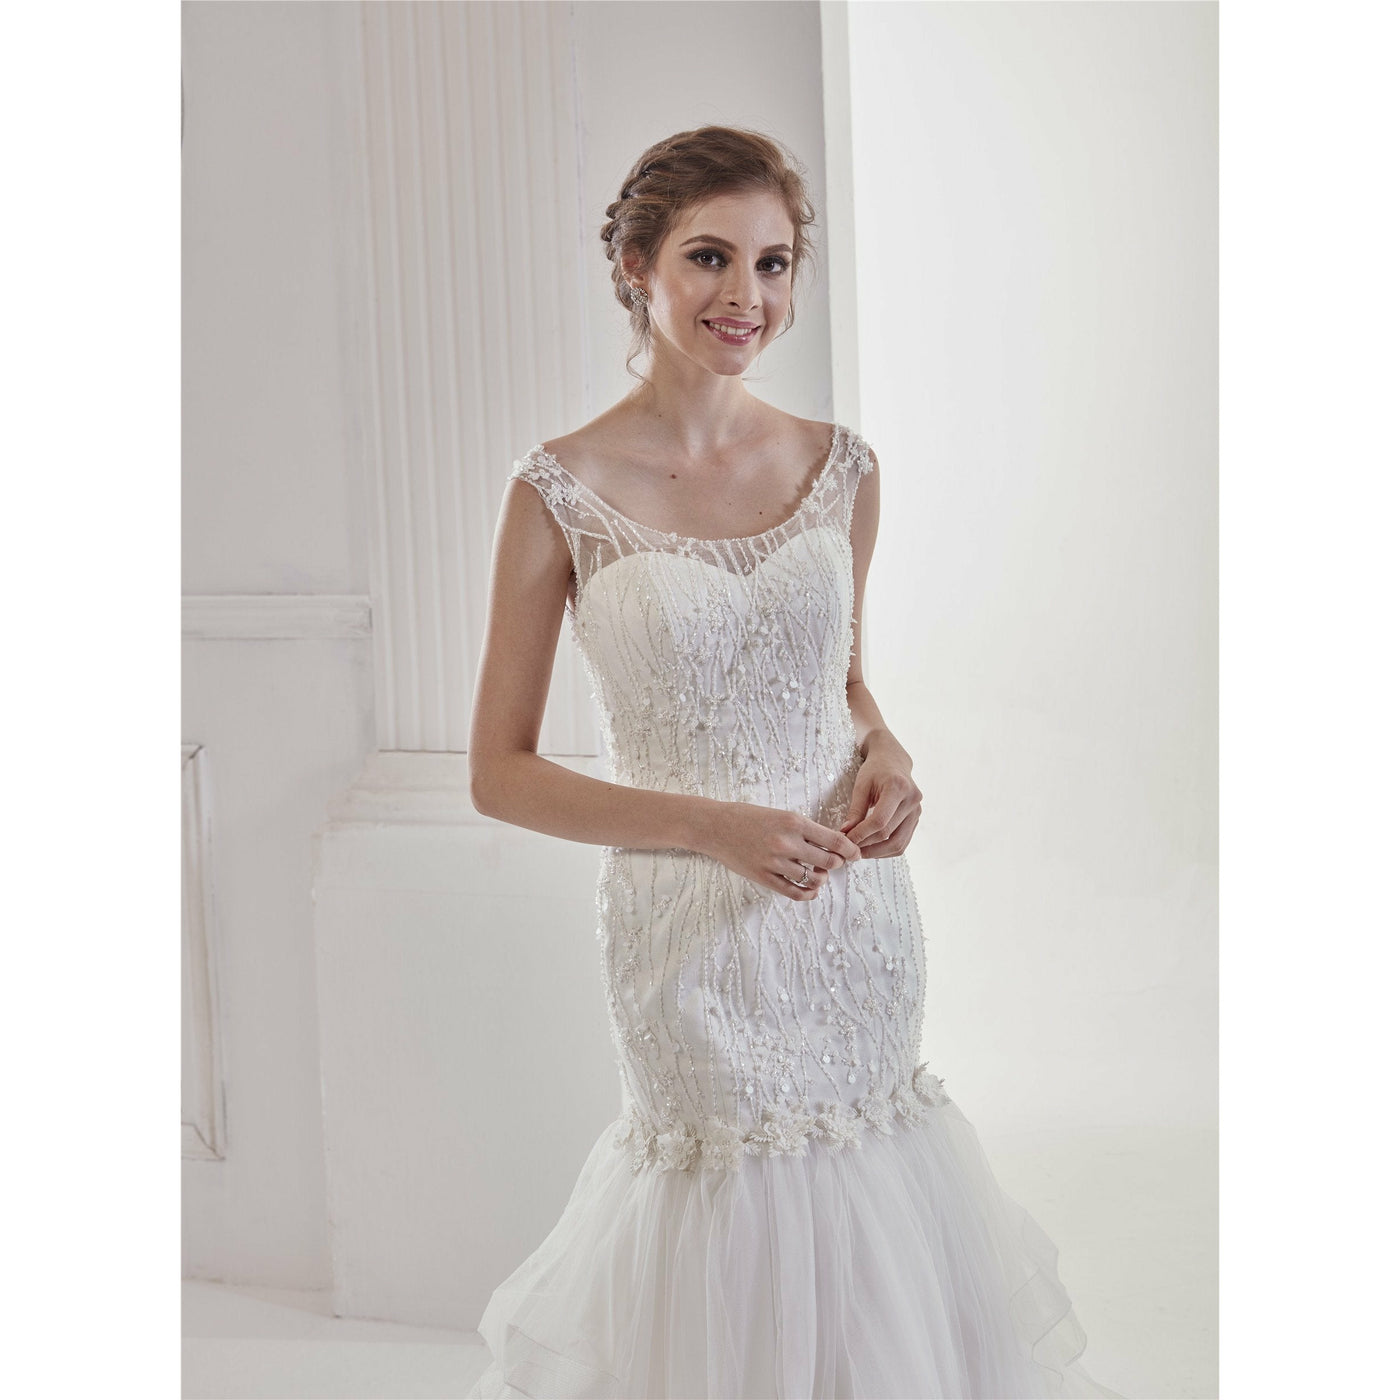 Chicely Illusion sweetheart sequined beaded mermaid wedding dress1